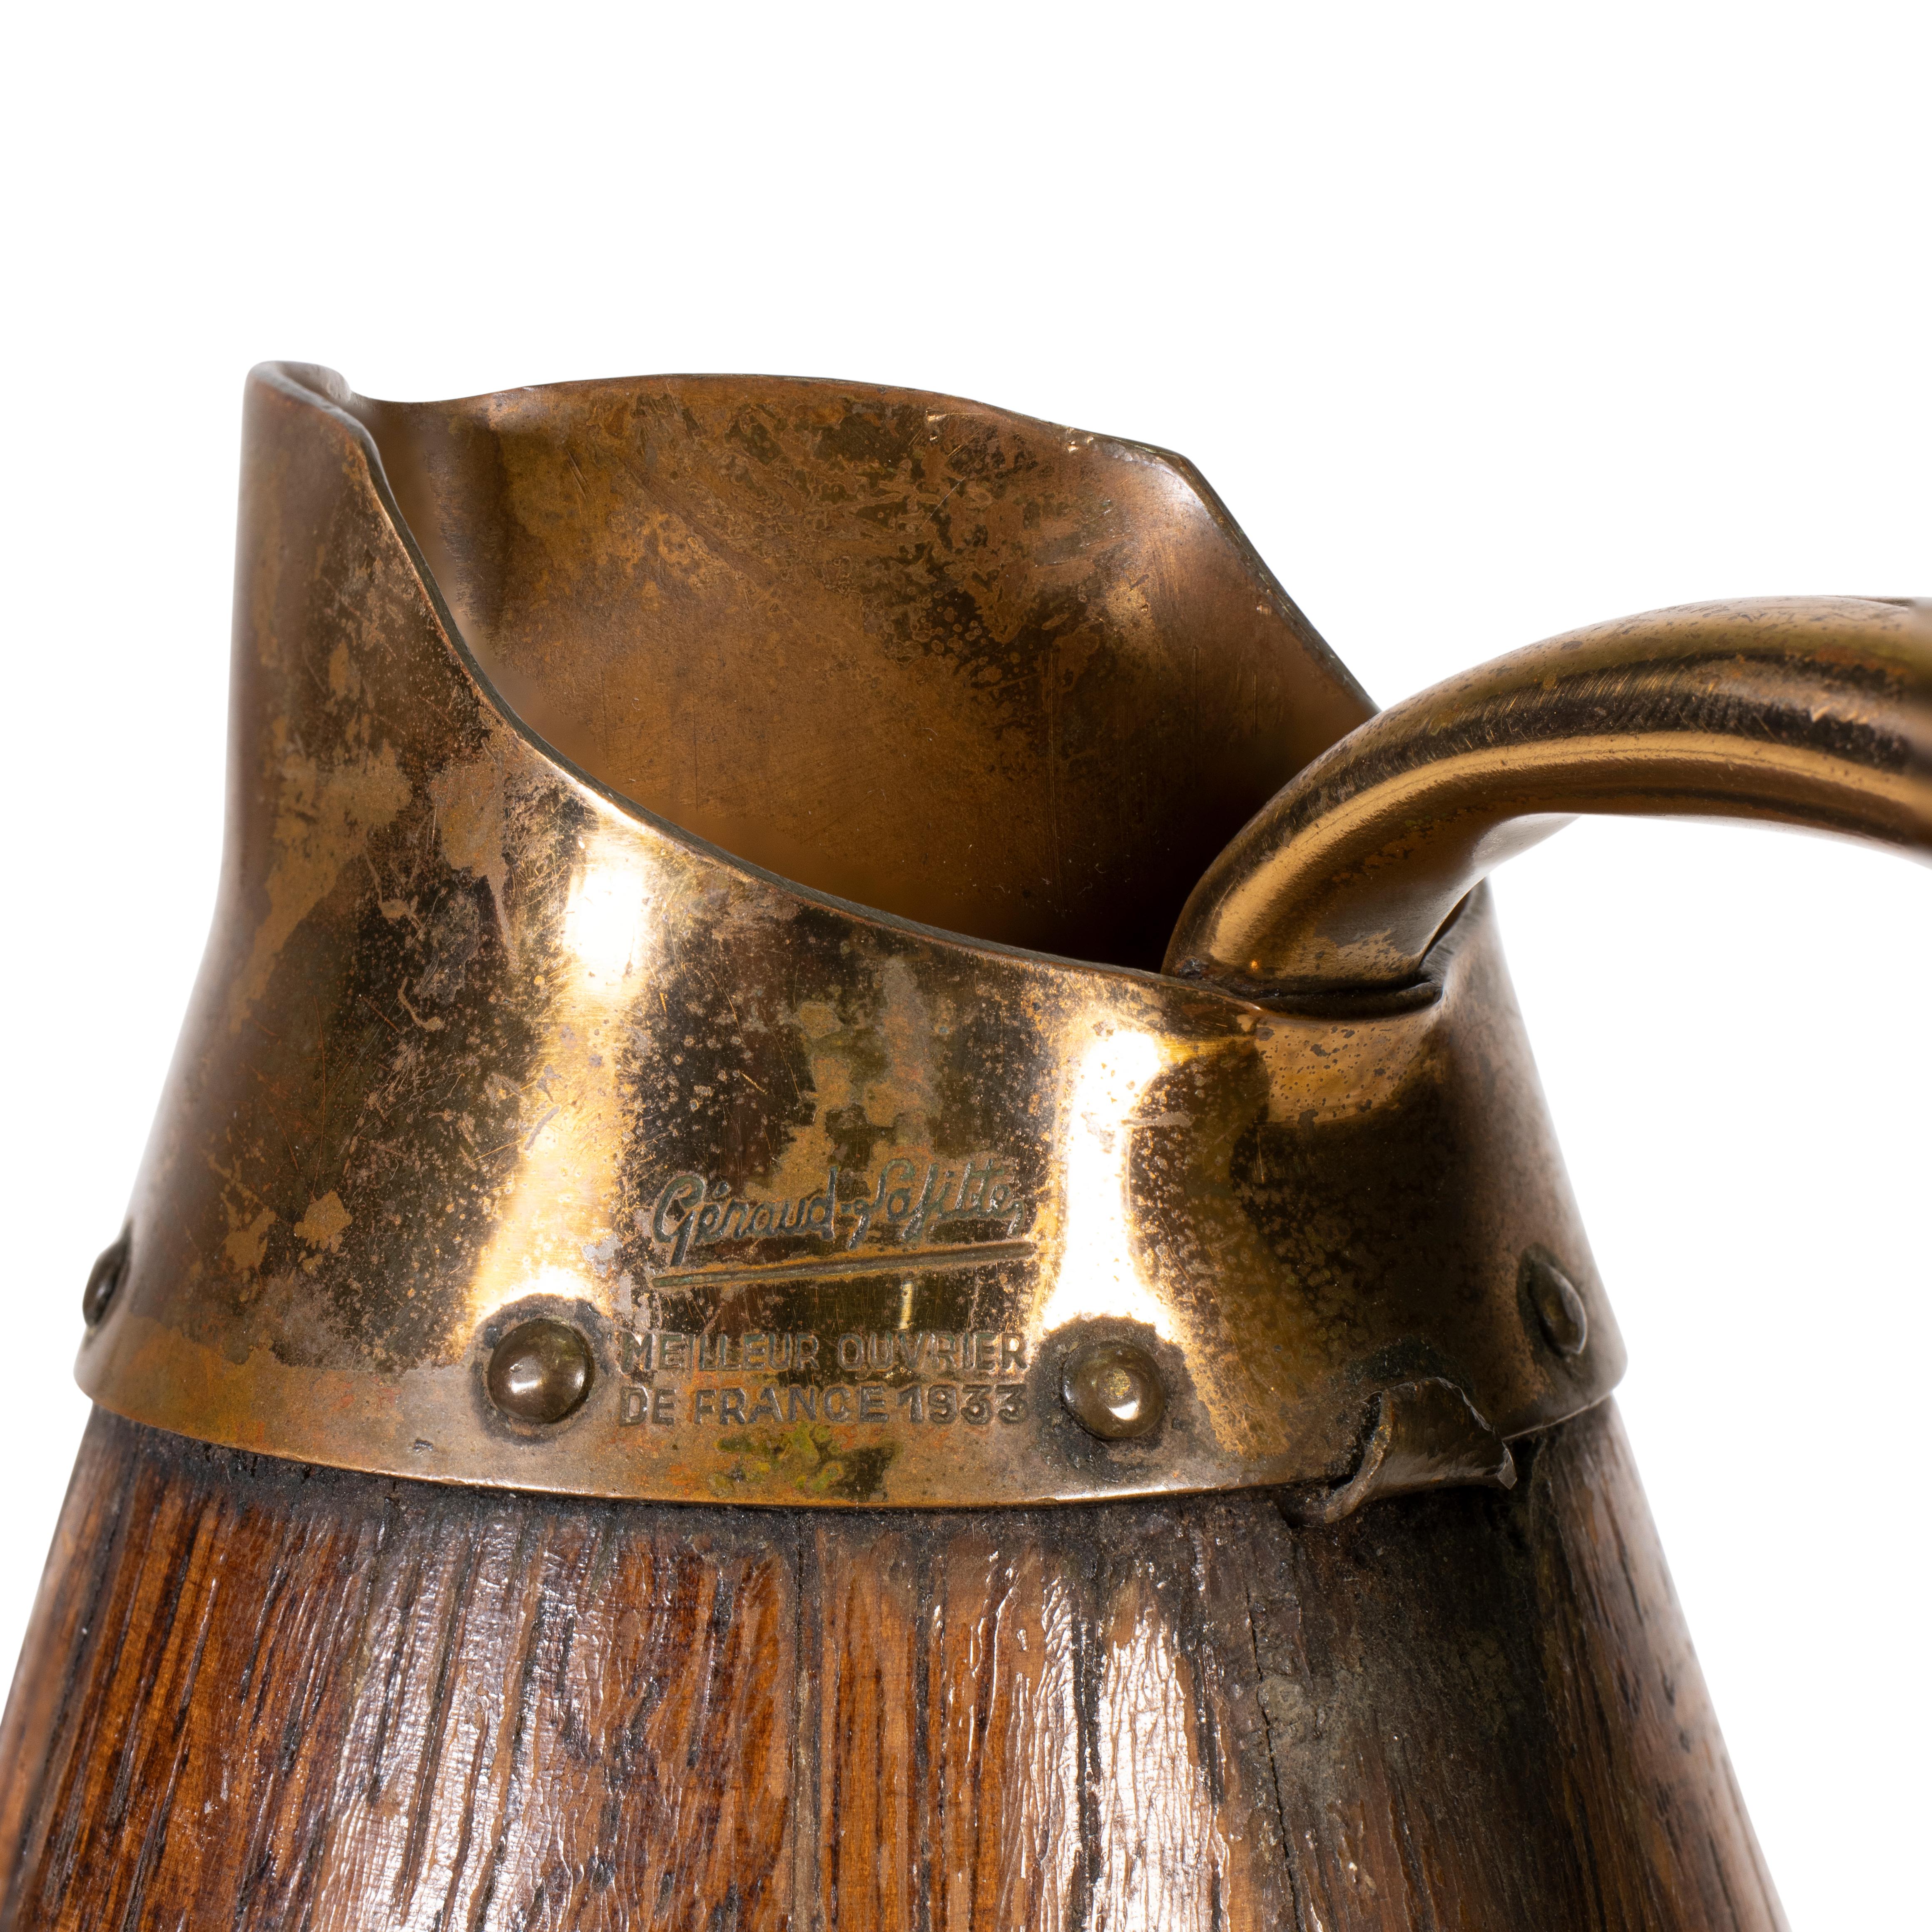 Miniature French oak and brass banded wine pitcher. A great barware piece!

Period: Early 20th Century
Origin: France
Size: 8 1/4